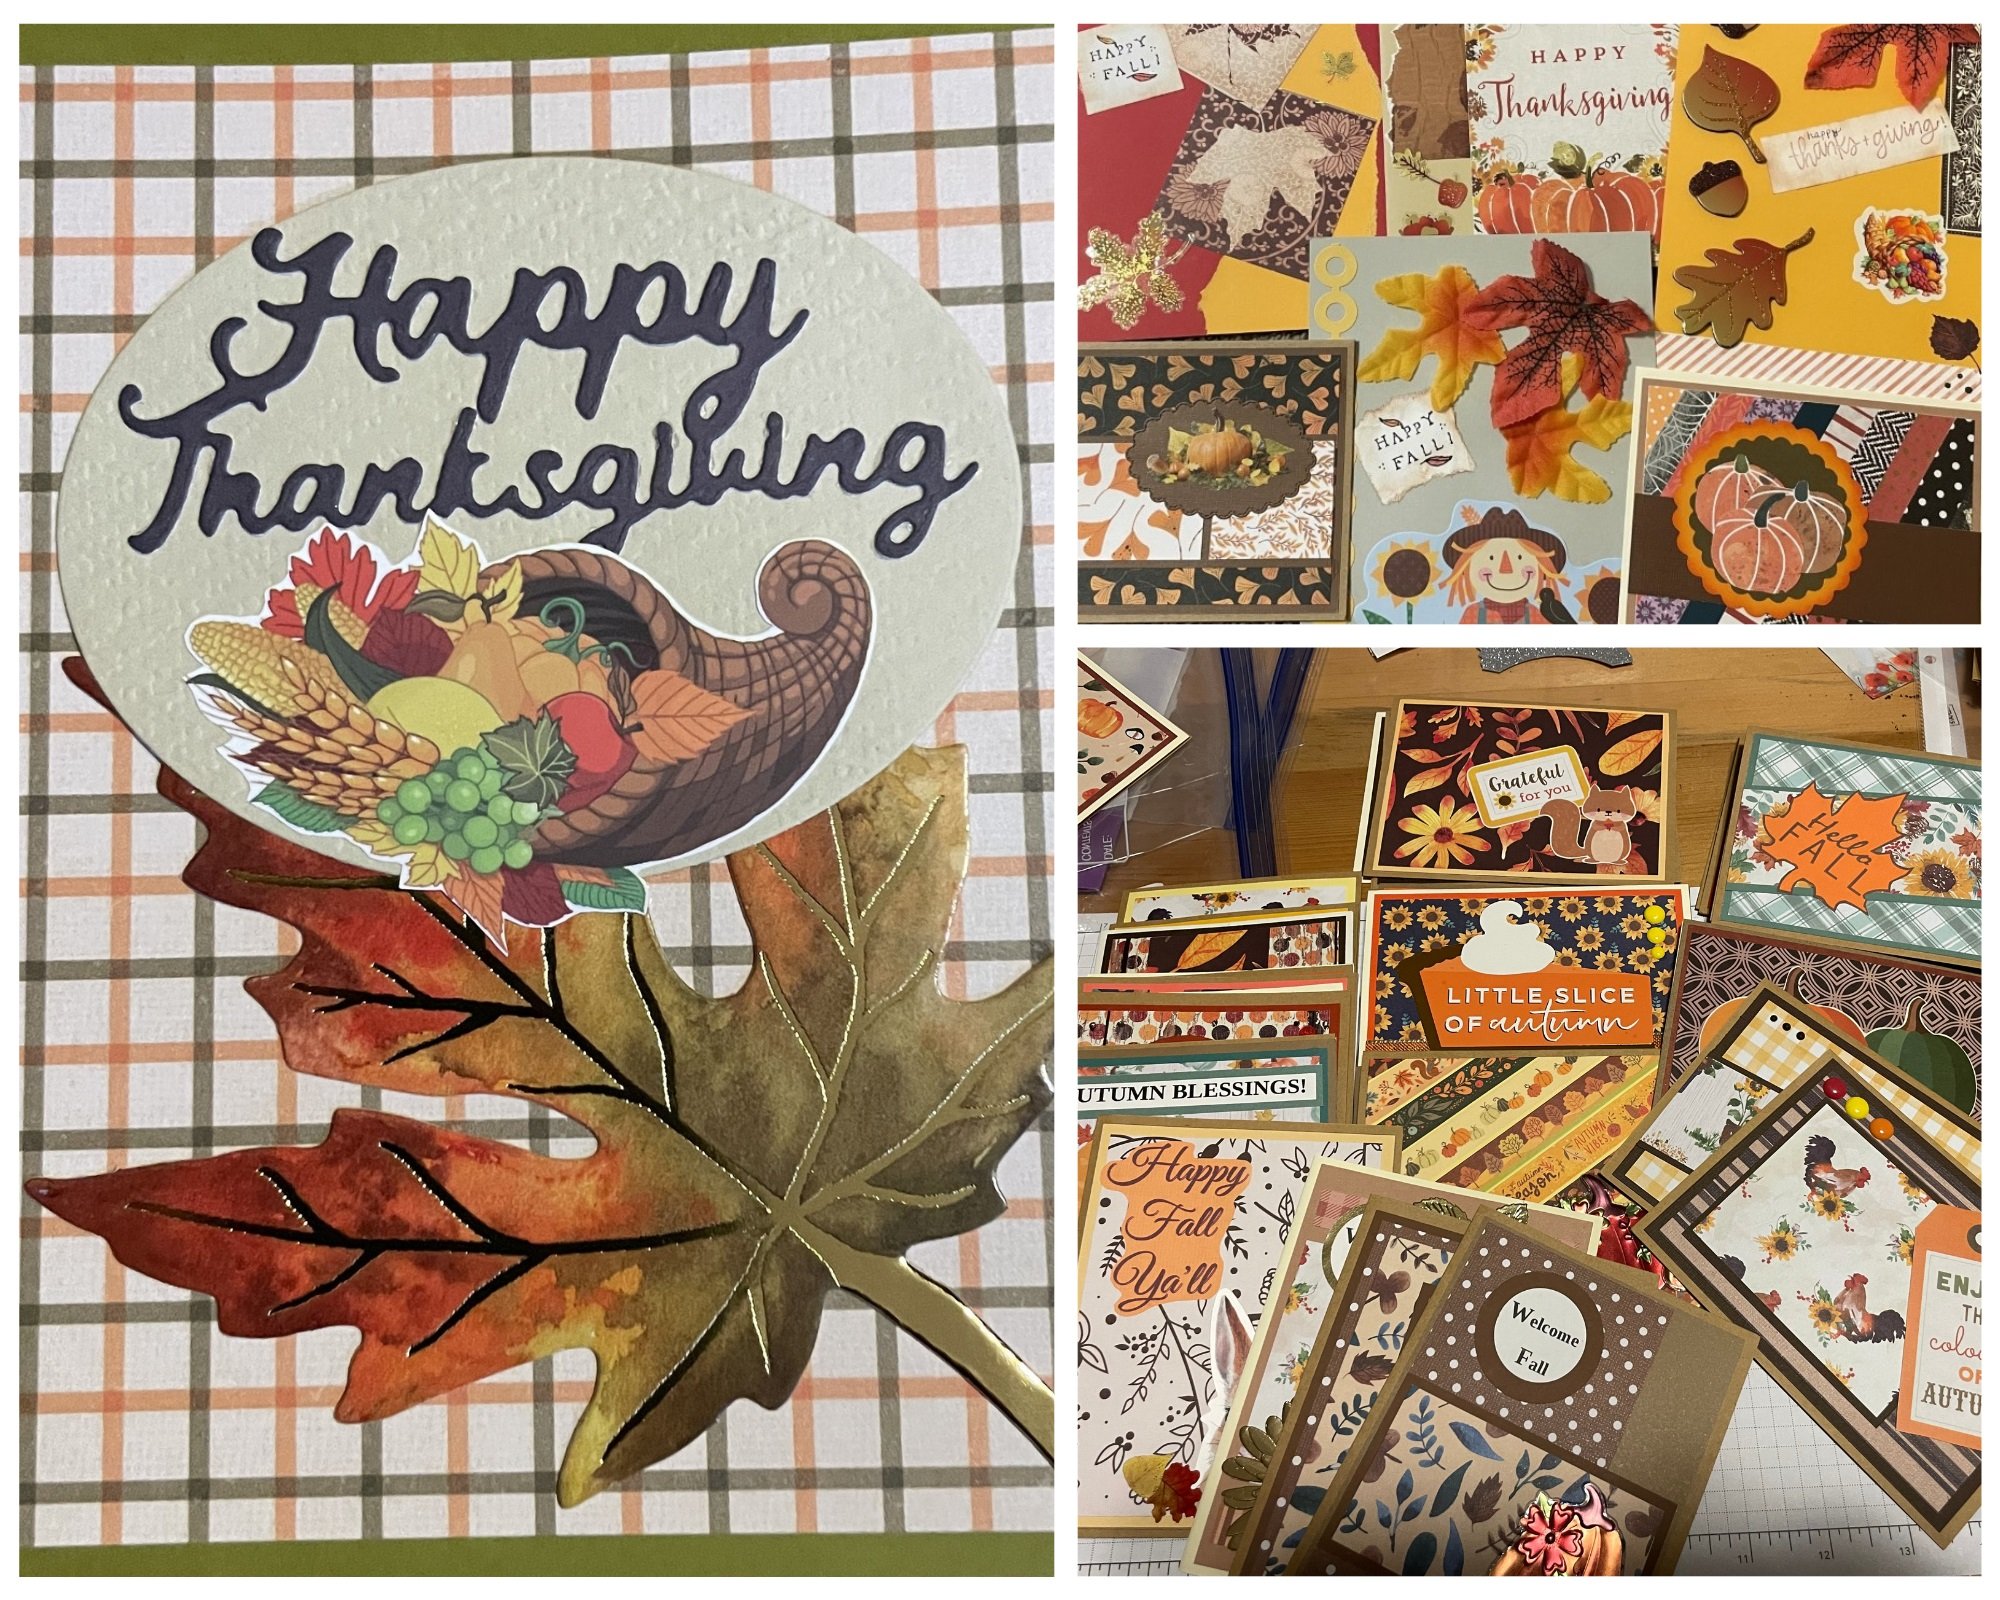 Thanksgiving Cards Collage.jpg